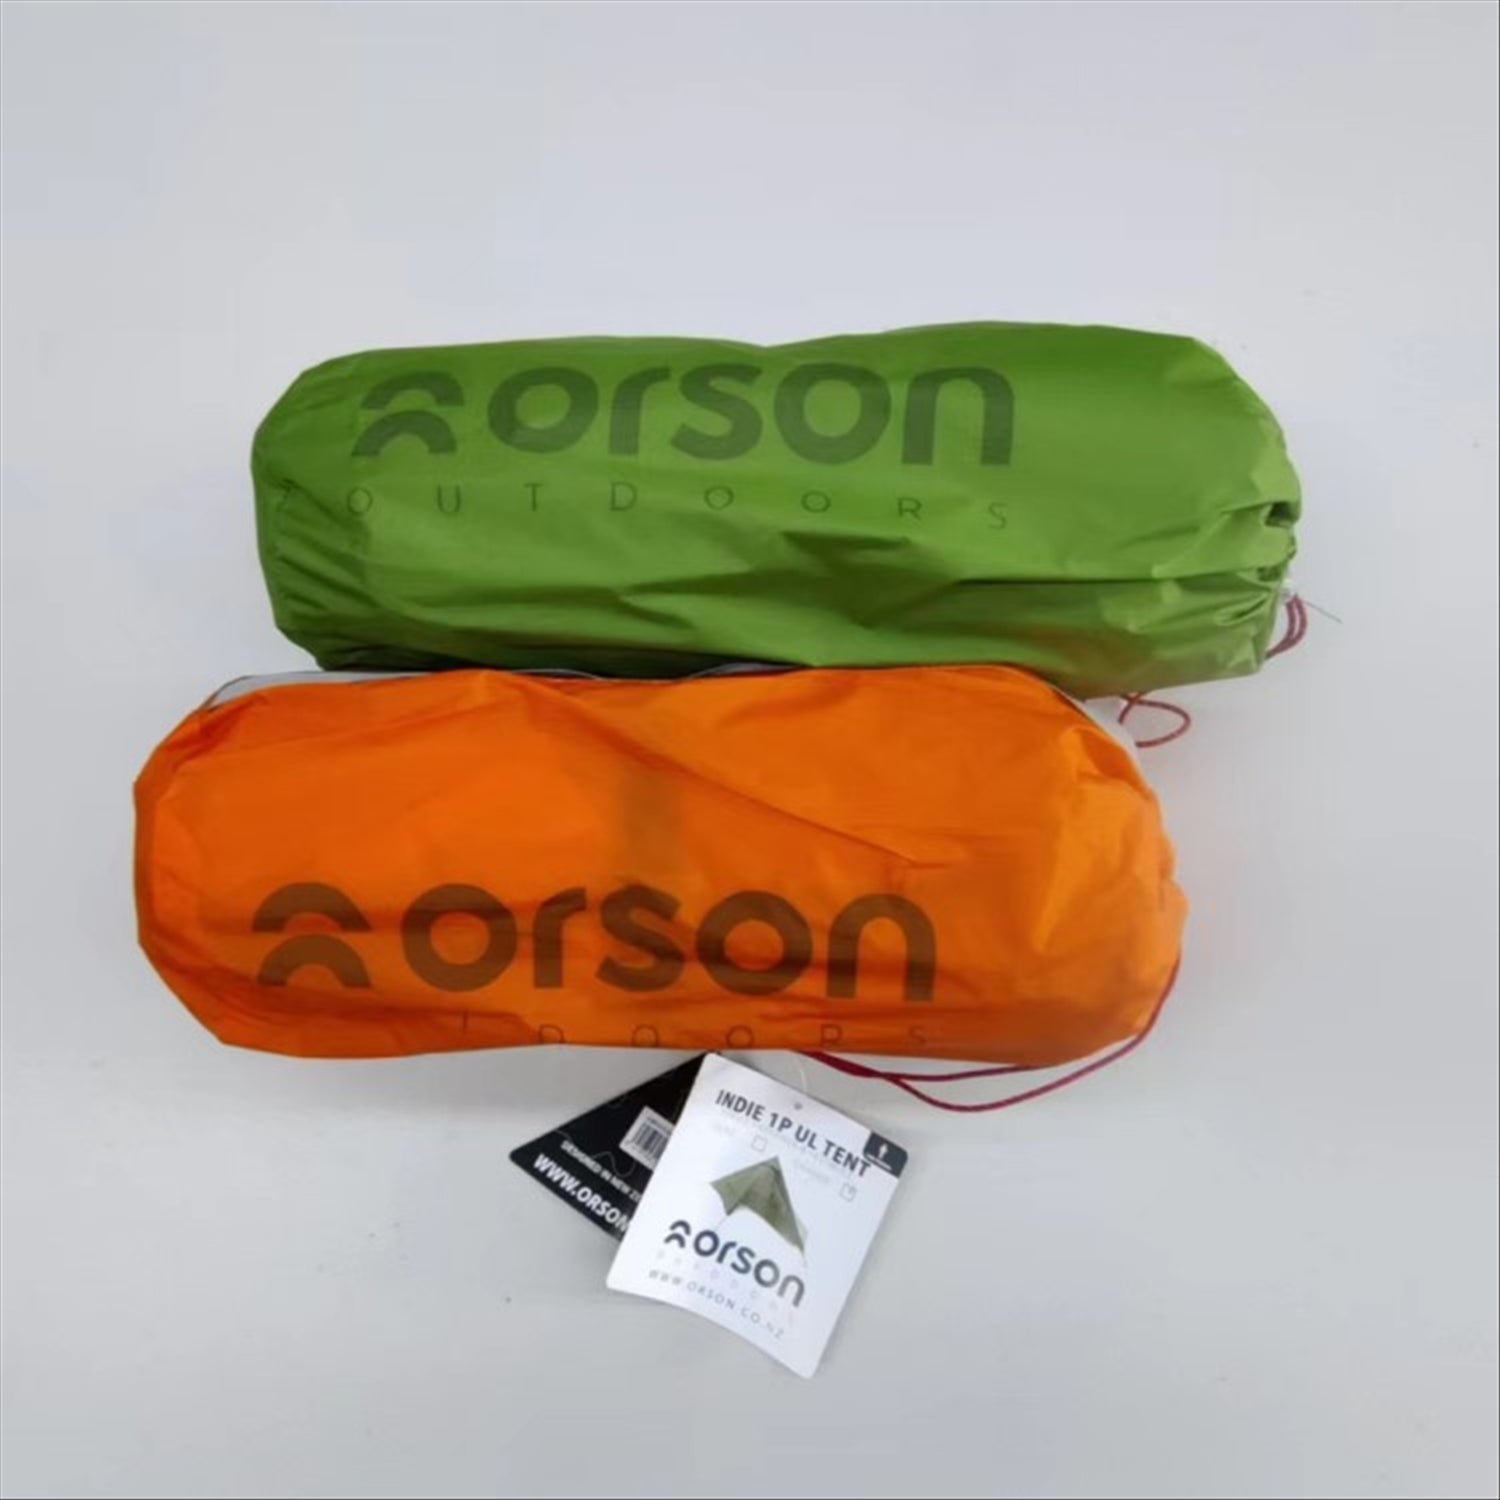 Orson Indie 1 Ultralight Tent